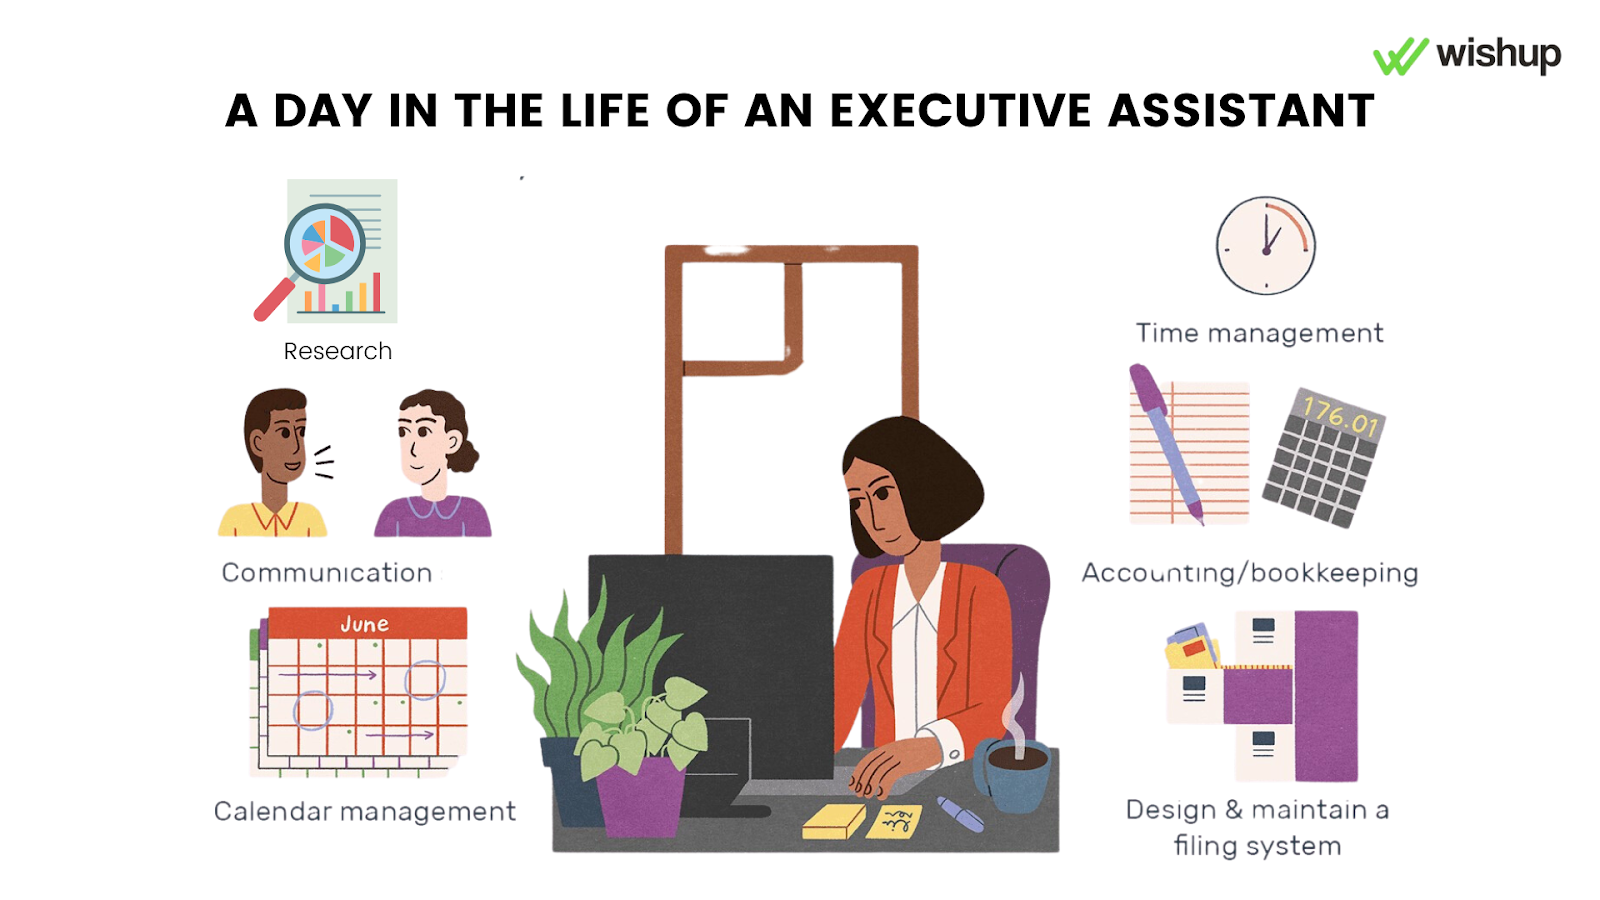 Know who an executive assistant is.